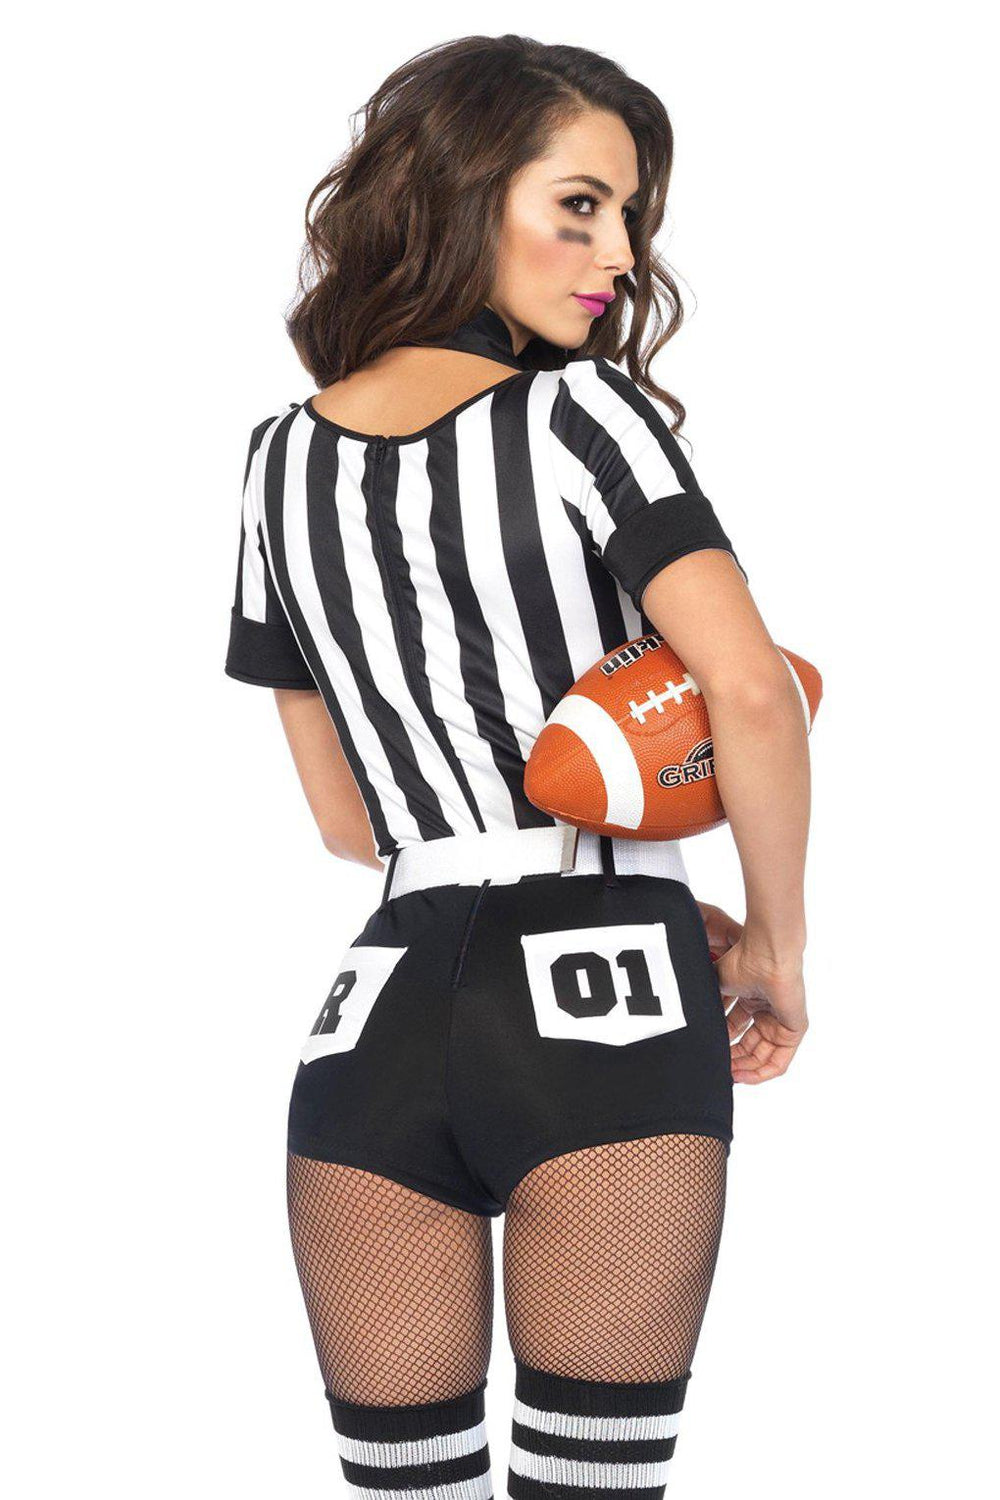 No Rules Referee Teddy-Other Costumes-Leg Avenue-SEXYSHOES.COM